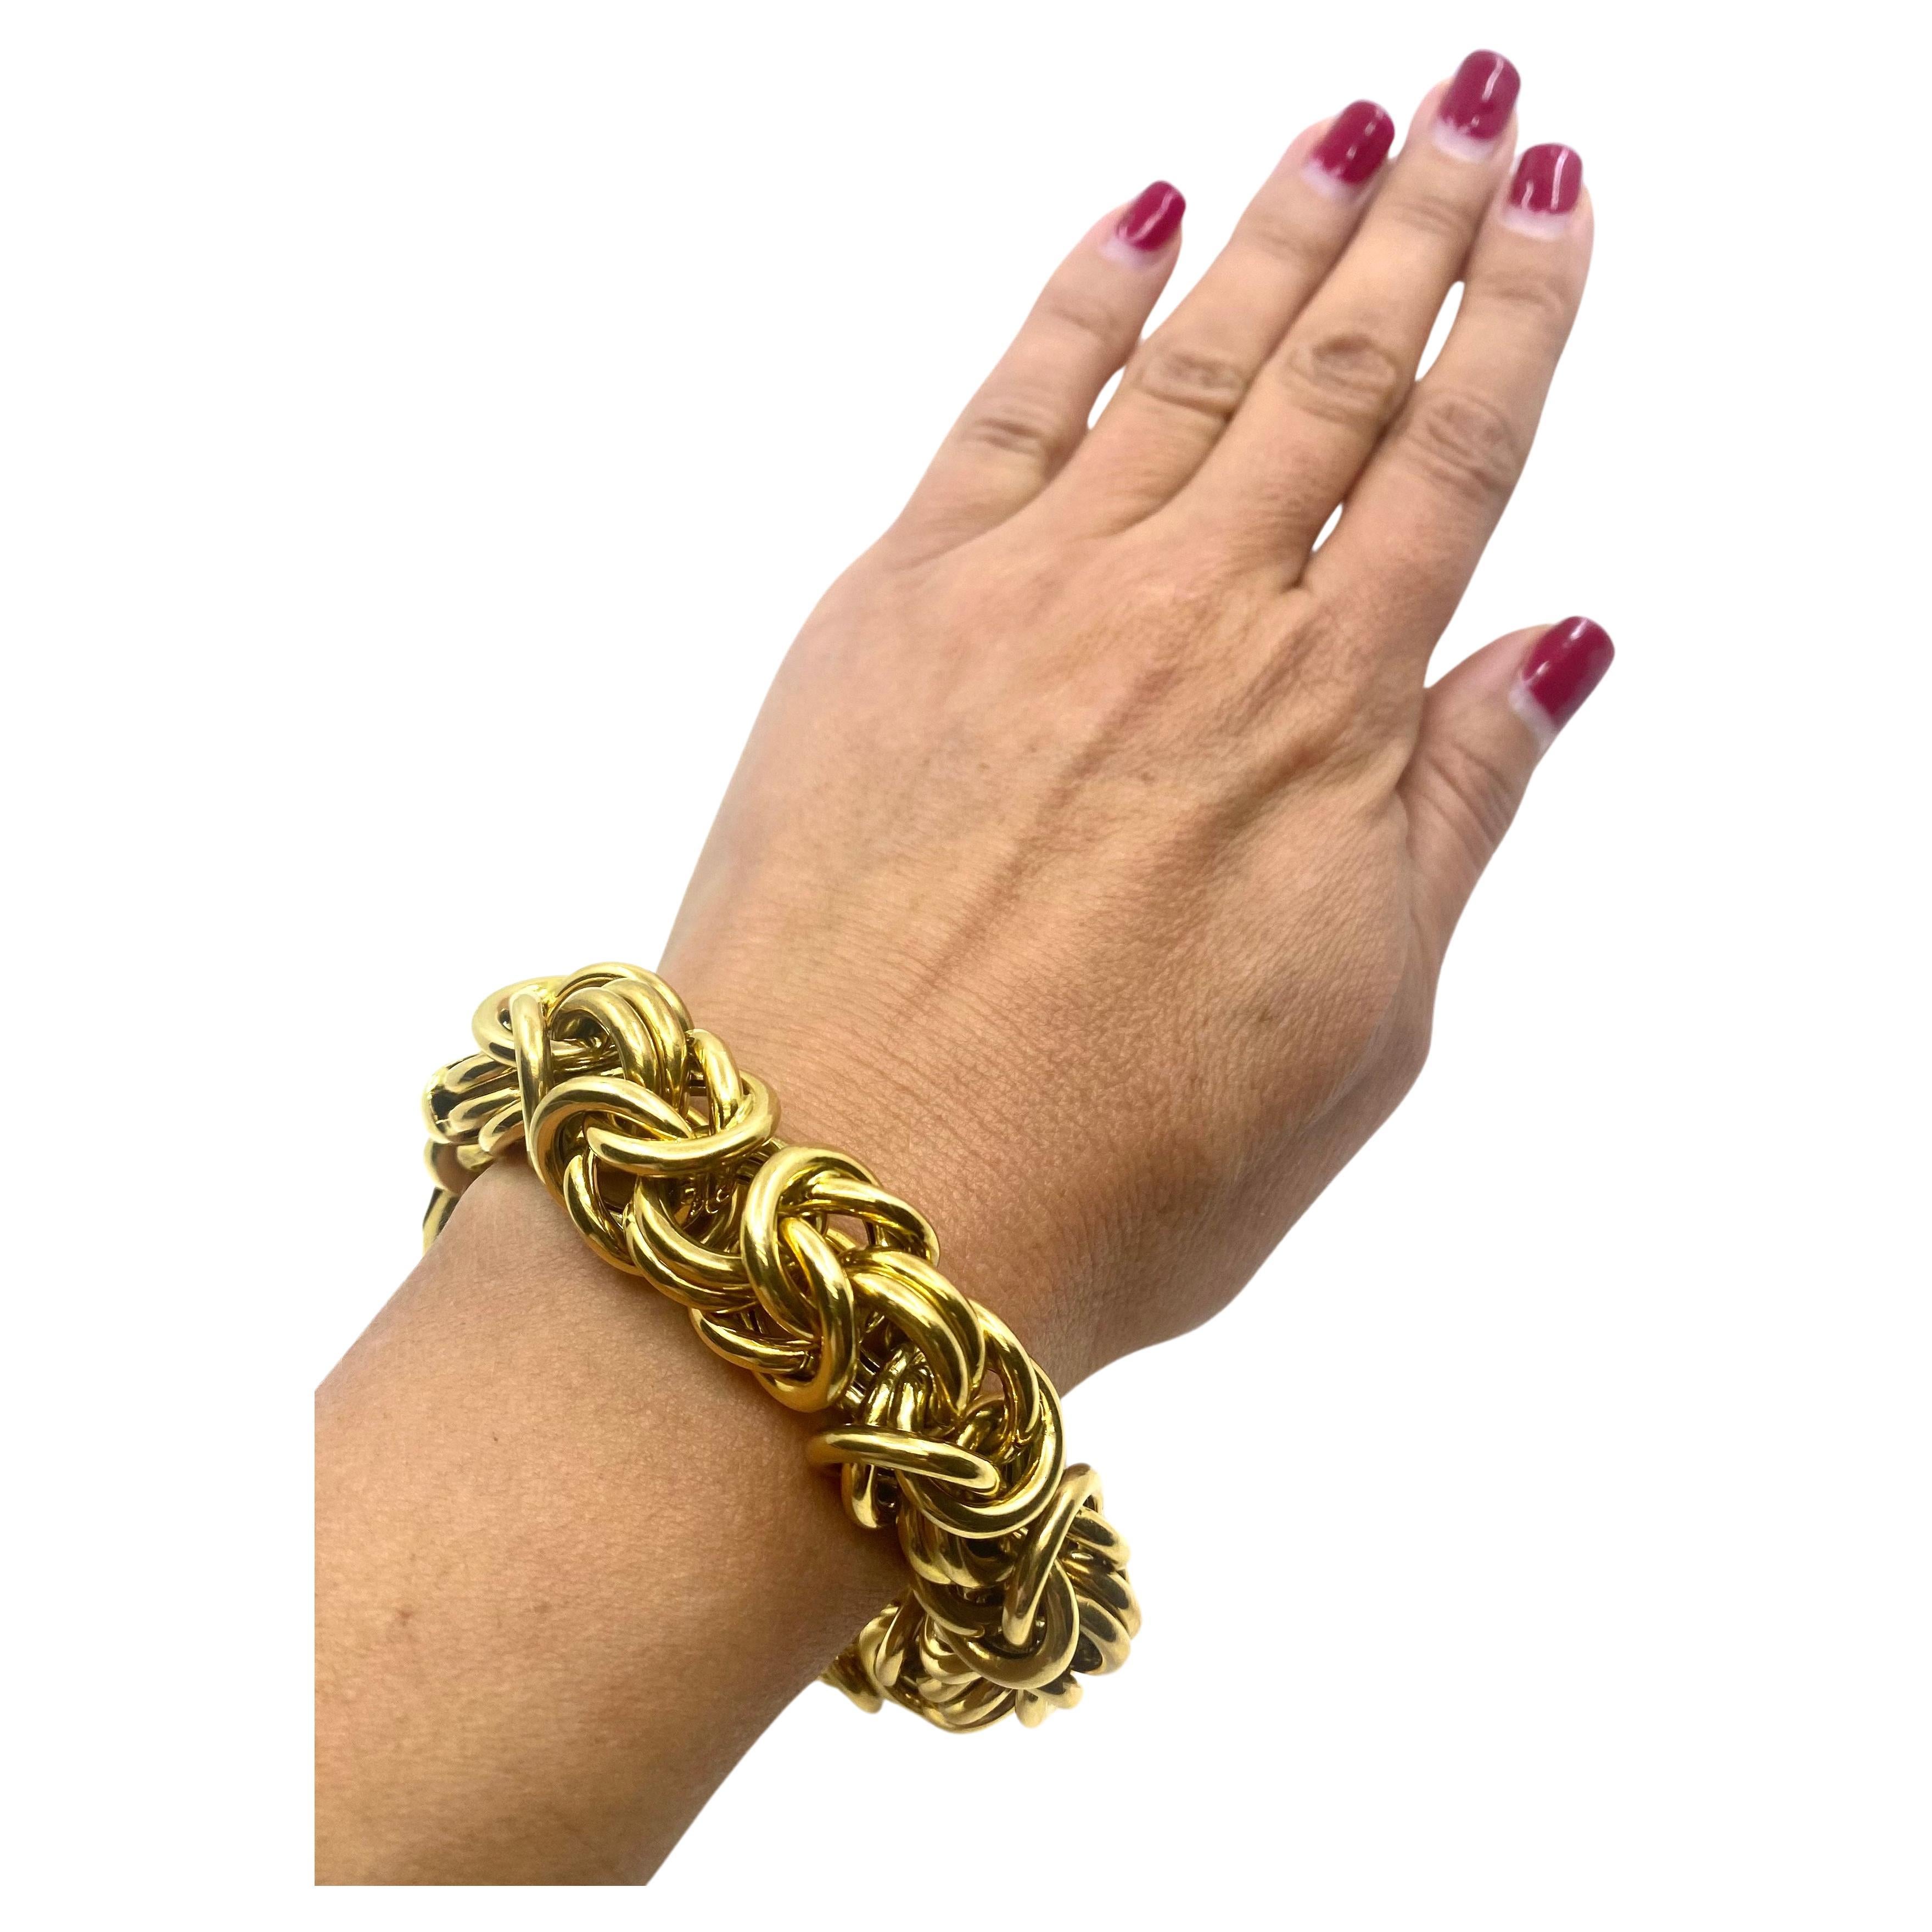 
CIRCA: 1990’s
MATERIALS: 18k Yellow Gold
WEIGHT: 114 grams
MEASUREMENTS: 8 1/2” x 3/4”
HALLMARKS: 18K, Italy

ITEM DETAILS:
A gorgeous Byzantine bracelet, made of 18k gold in Italy. 
It’s a chunky yet airy piece with a substantial clasp. The clasp